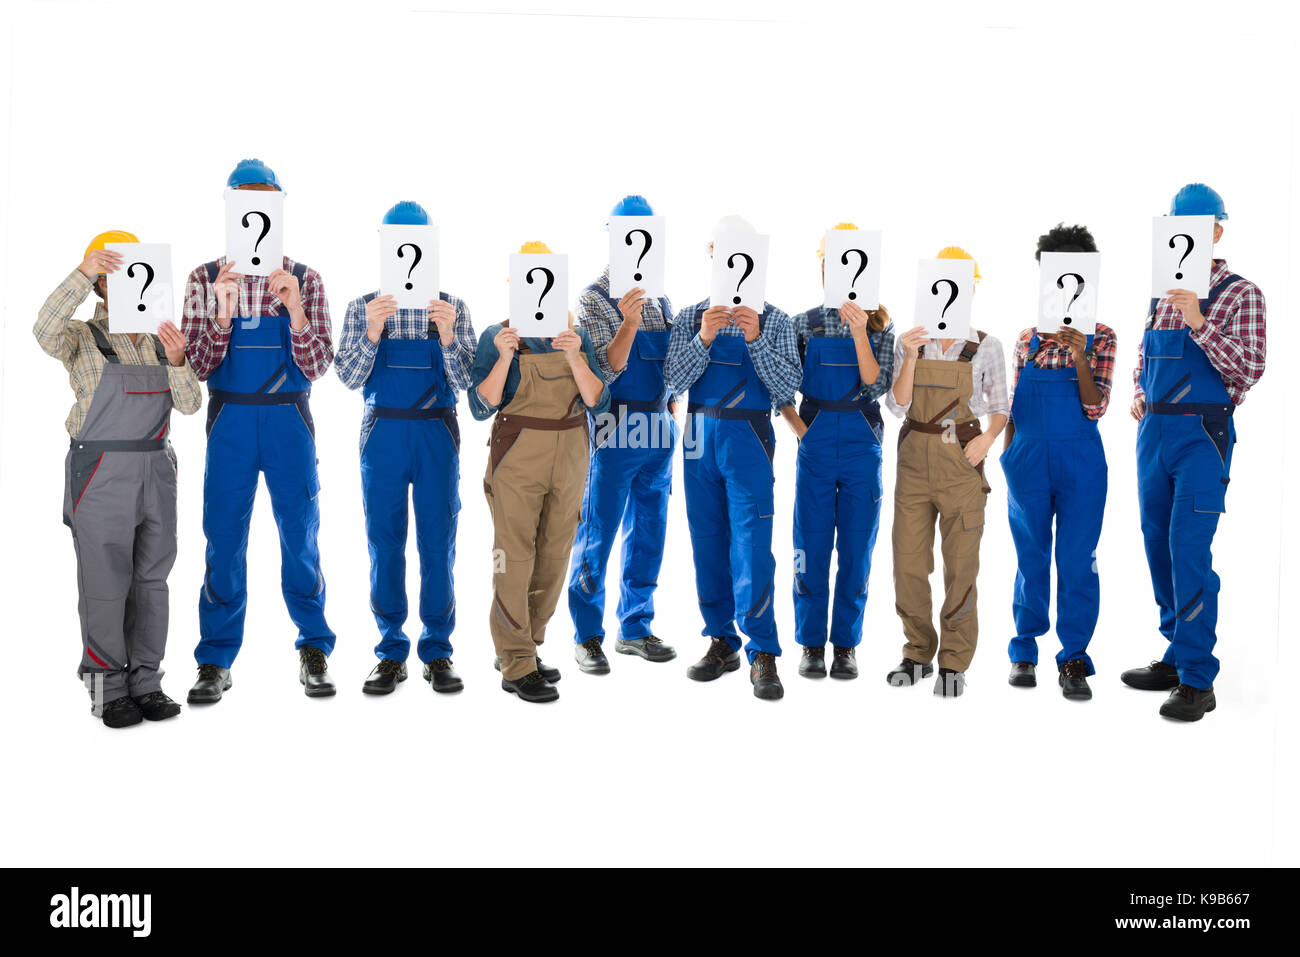 Full length of construction workers hiding faces with question mark signs against white background Stock Photo